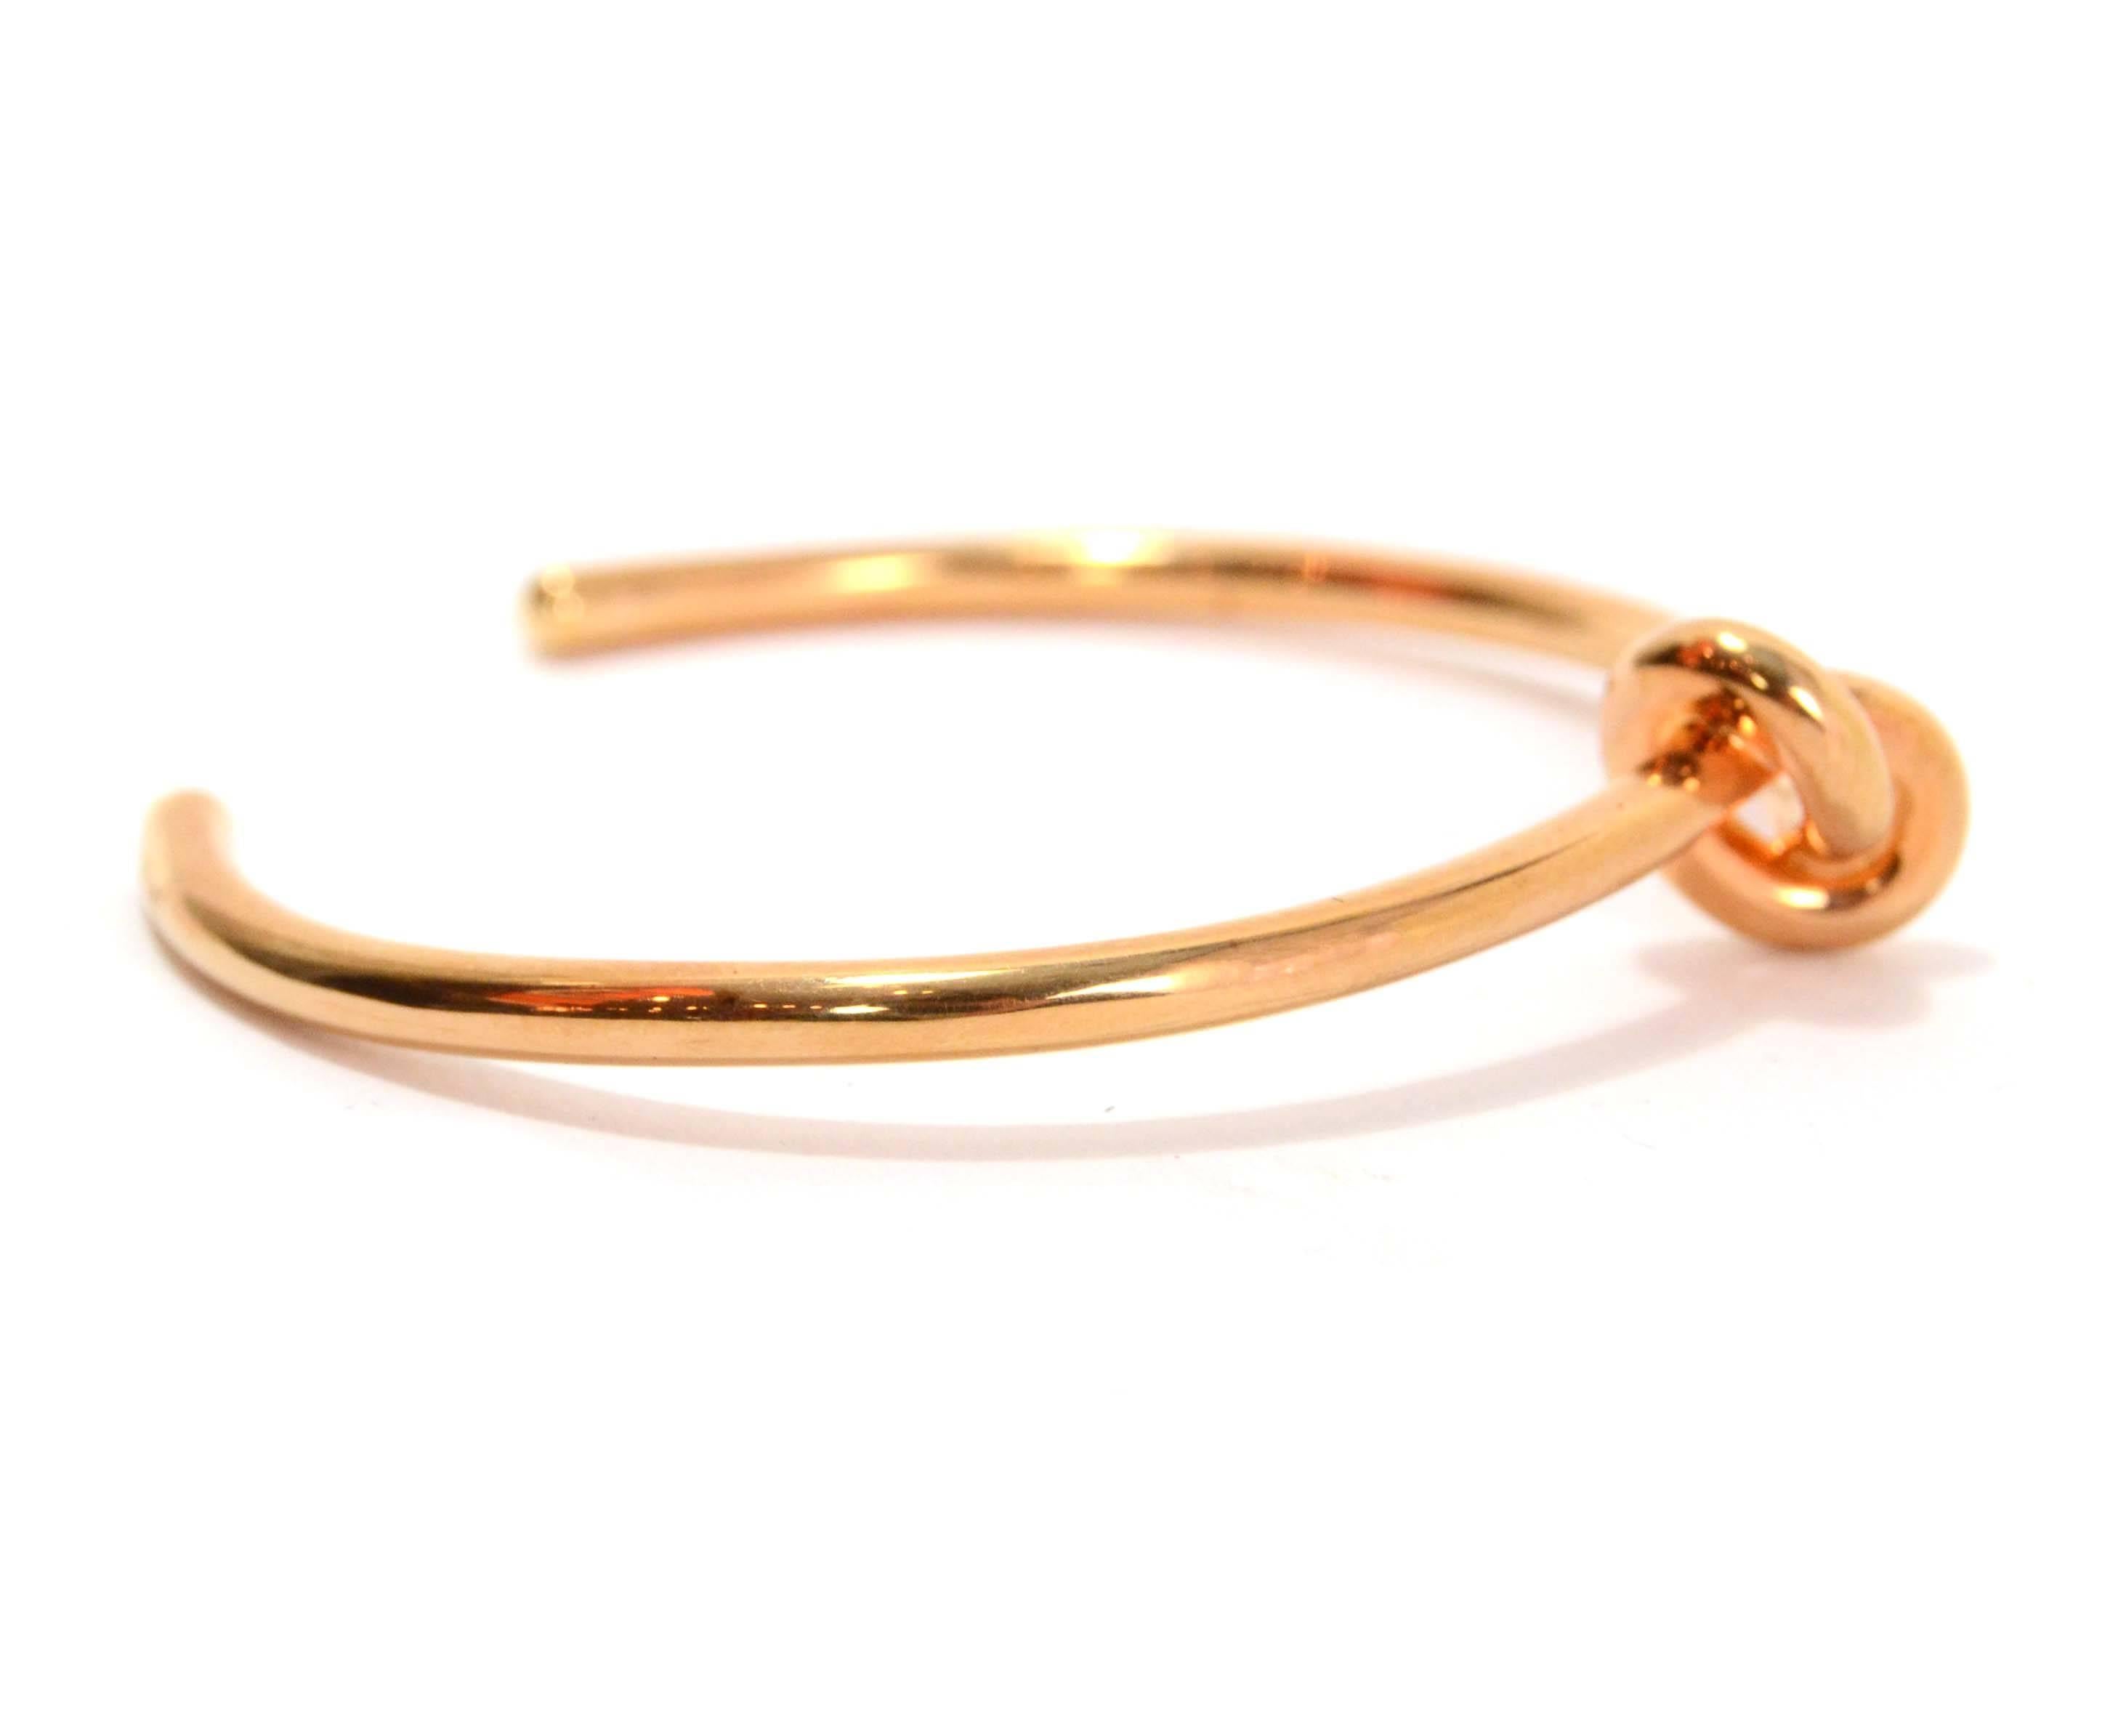 Celine Rose Gold Knot Cuff Bracelet
Made In: Italy
Color: Rose gold
Materials: Metal
Closure: None
Stamp: Celine Paris Made in Italy L
Retail Price: $620 + tax
Overall Condition: Excellent pre-owned condition
Marked Size: L
Circumference: